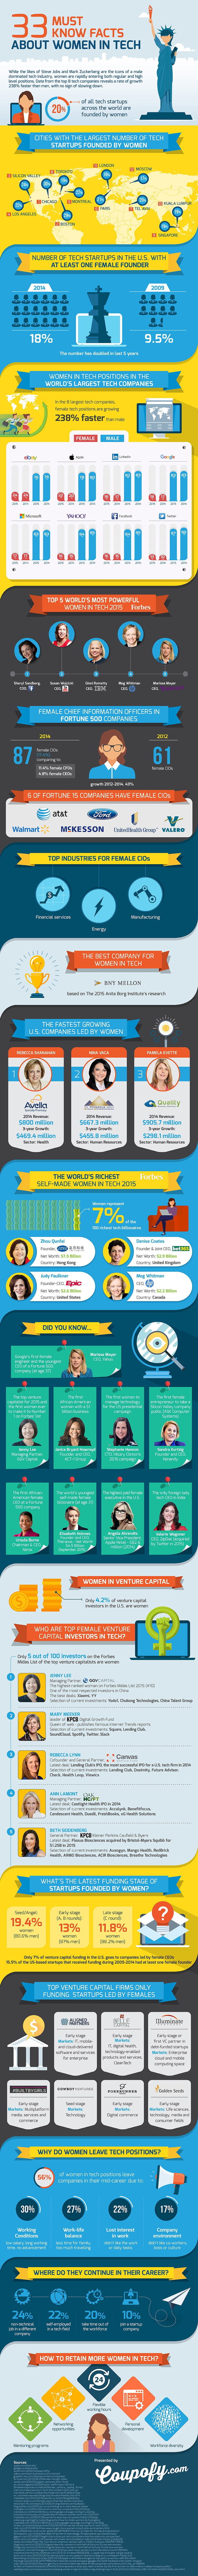 33 Must-Know Facts About Women In Tech [Infographic]